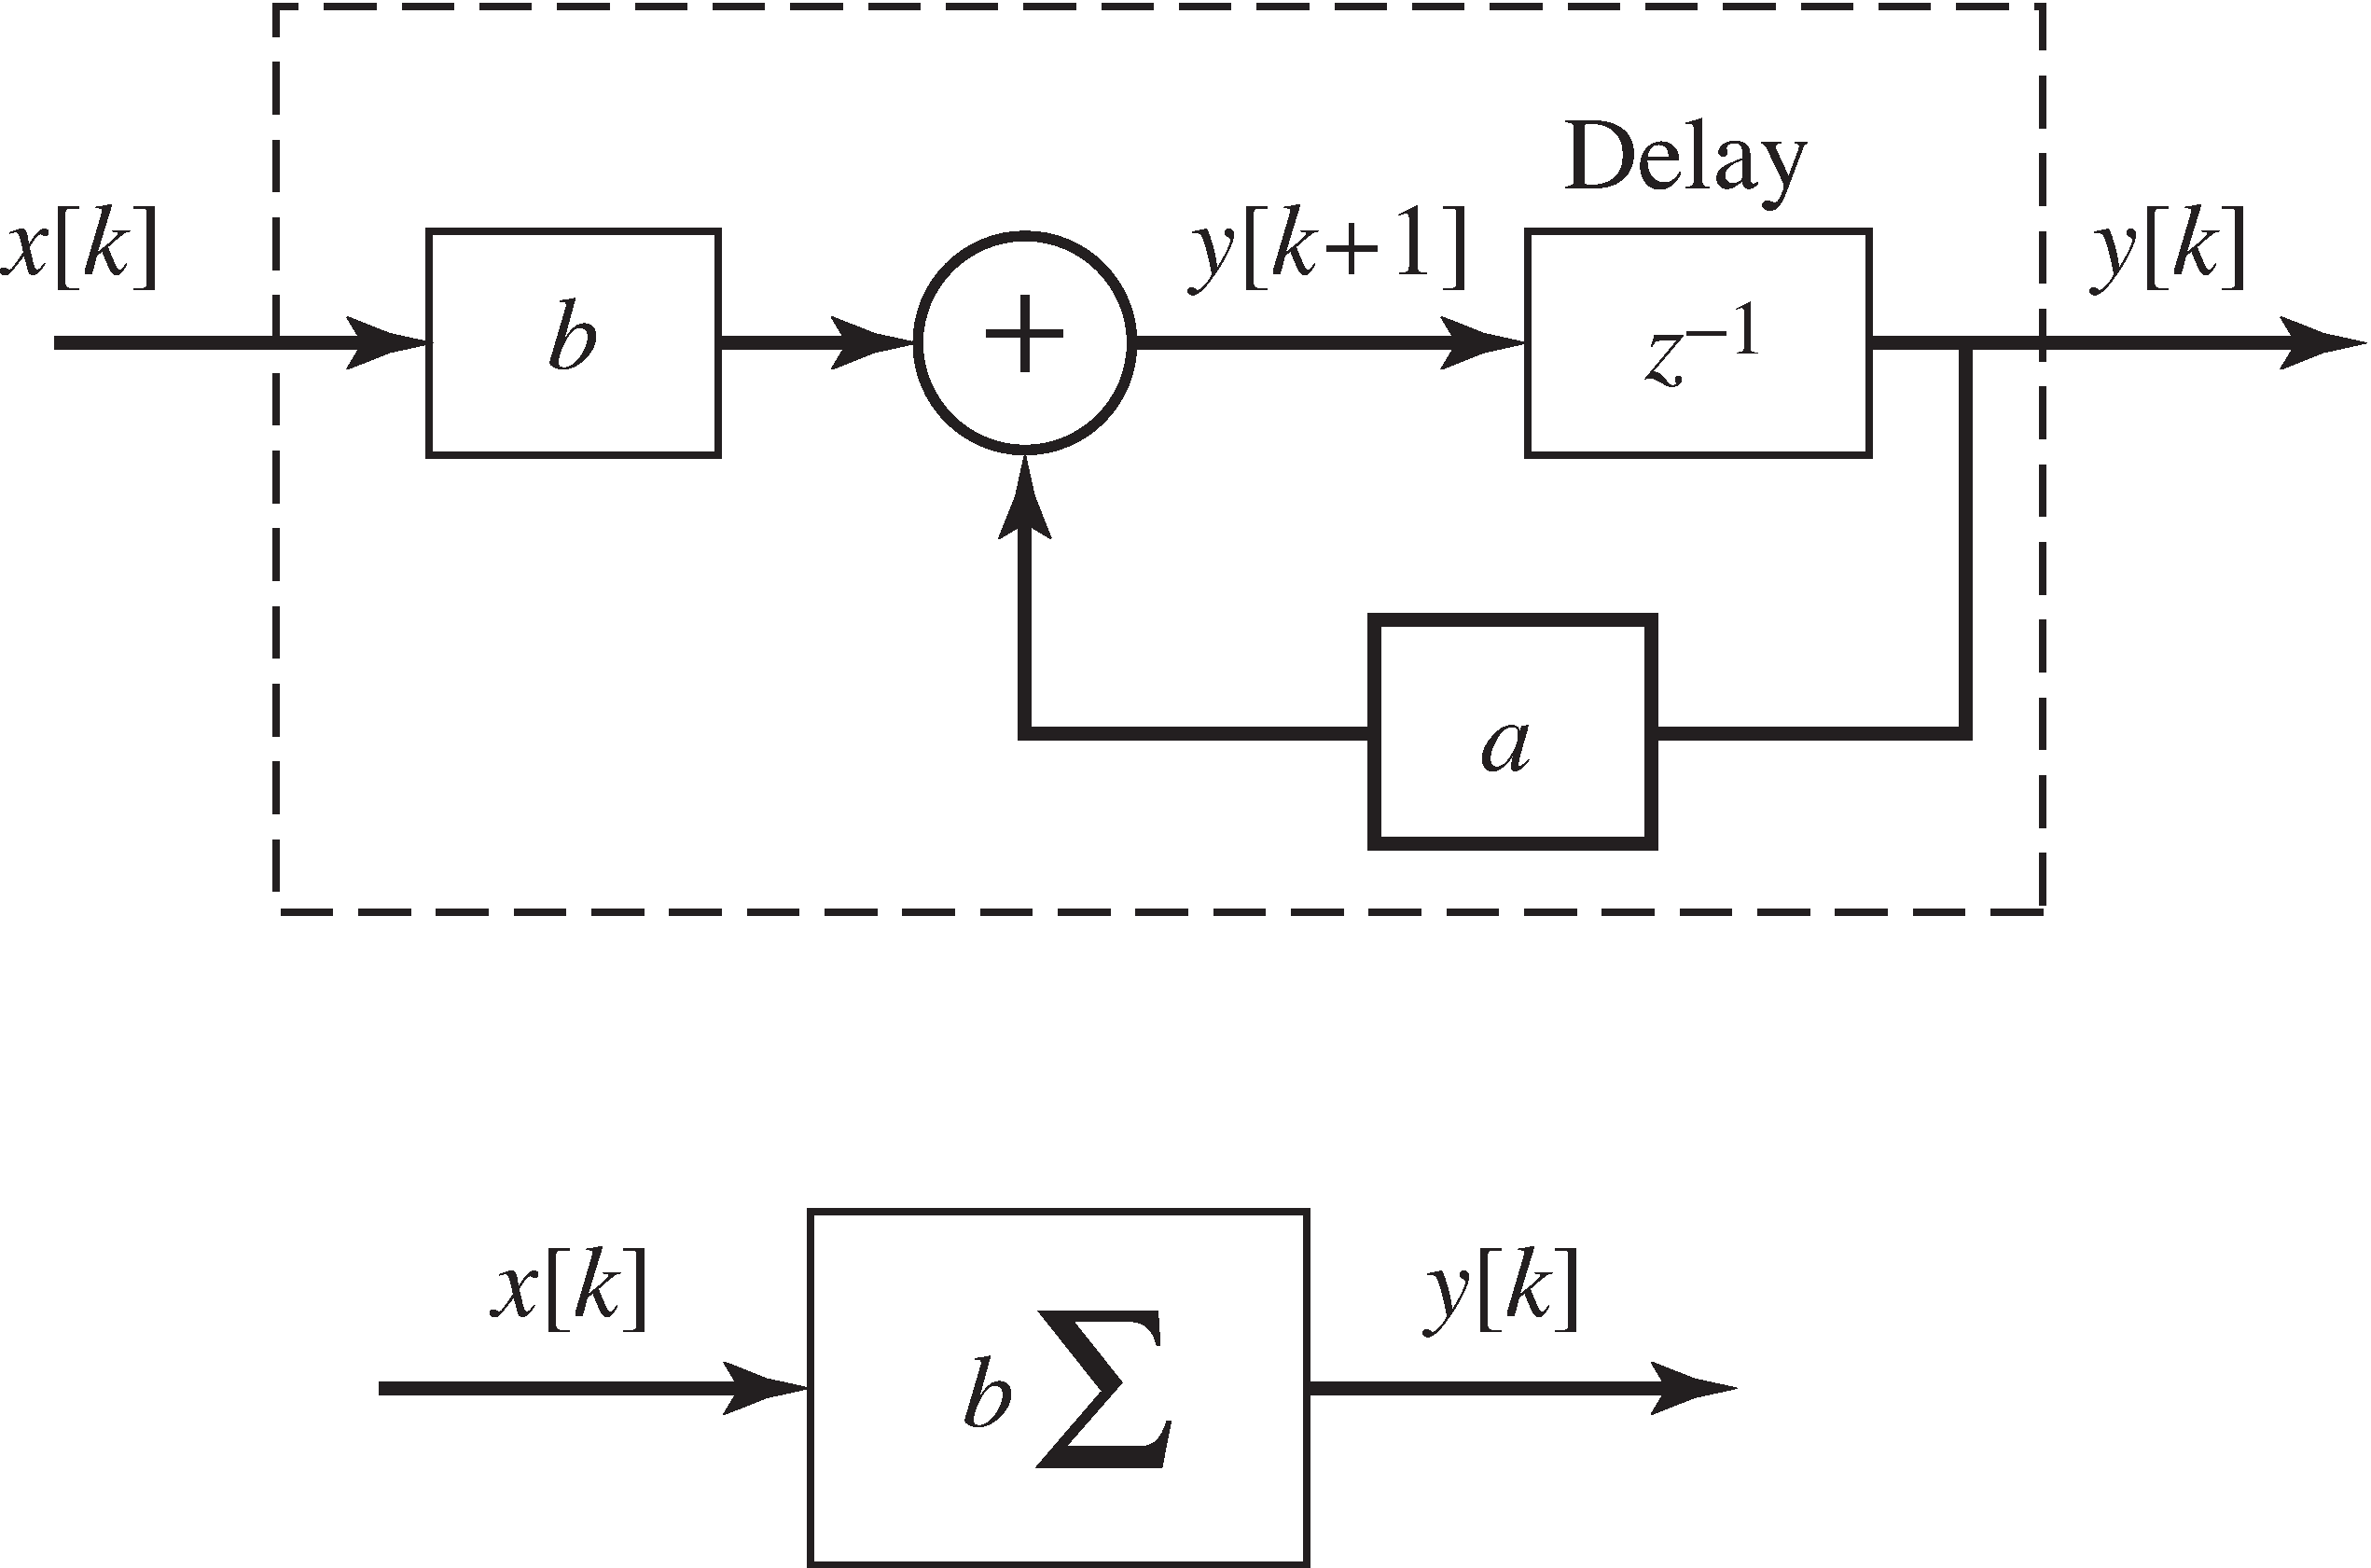 The LTI system y[k+1]=ay[k]+bx[k], with input x[k]and output y[k] is represented schematically using the delay z^-1 in this simple block diagram. The special case when a=1 is called a summer because it effectively adds up all the input values, and it often drawn more concisely as in the lower half of the figure.